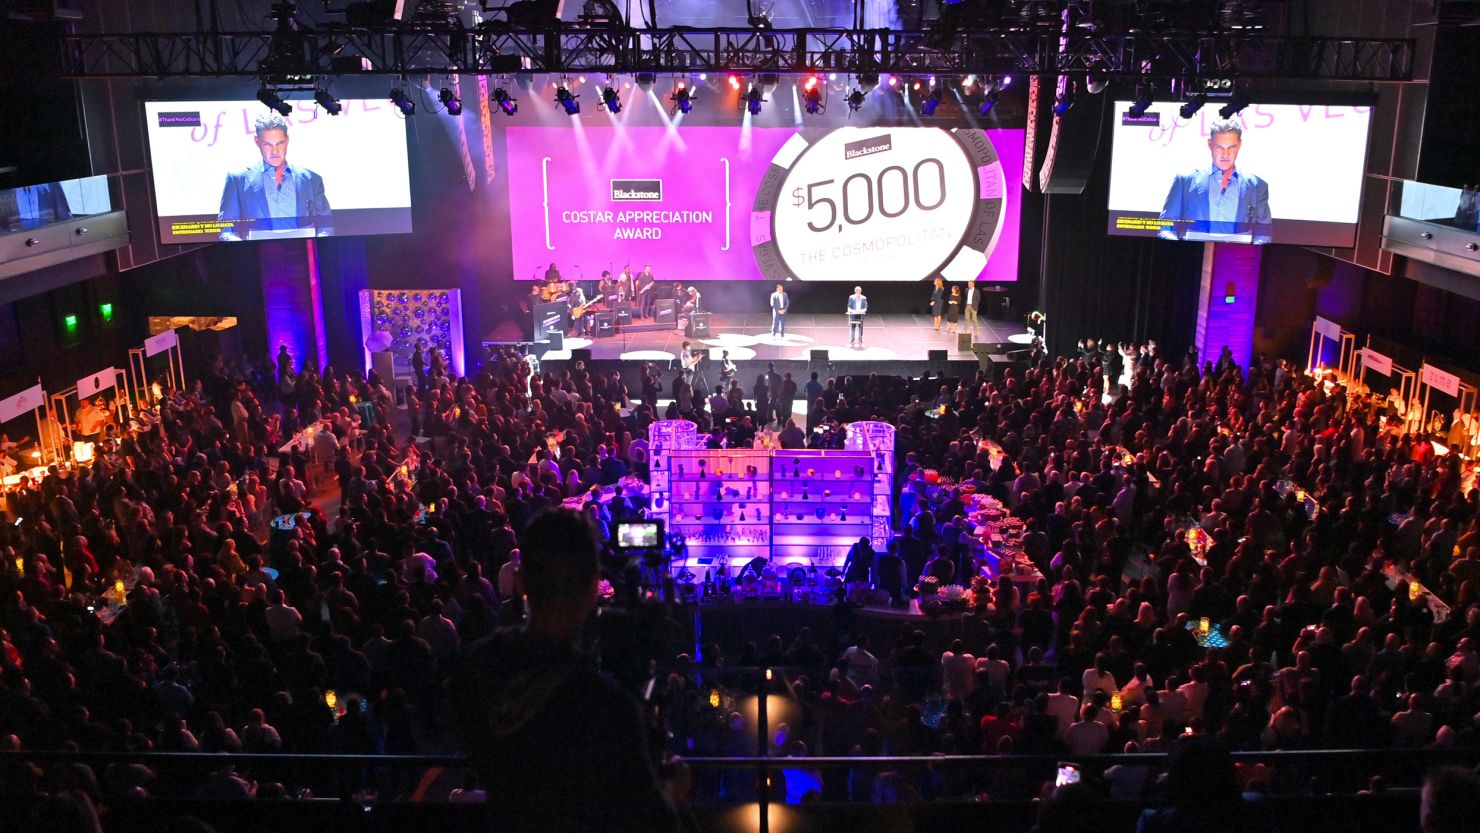 The Cosmopolitan gave its employees $5,000 bonuses during a corporate event.